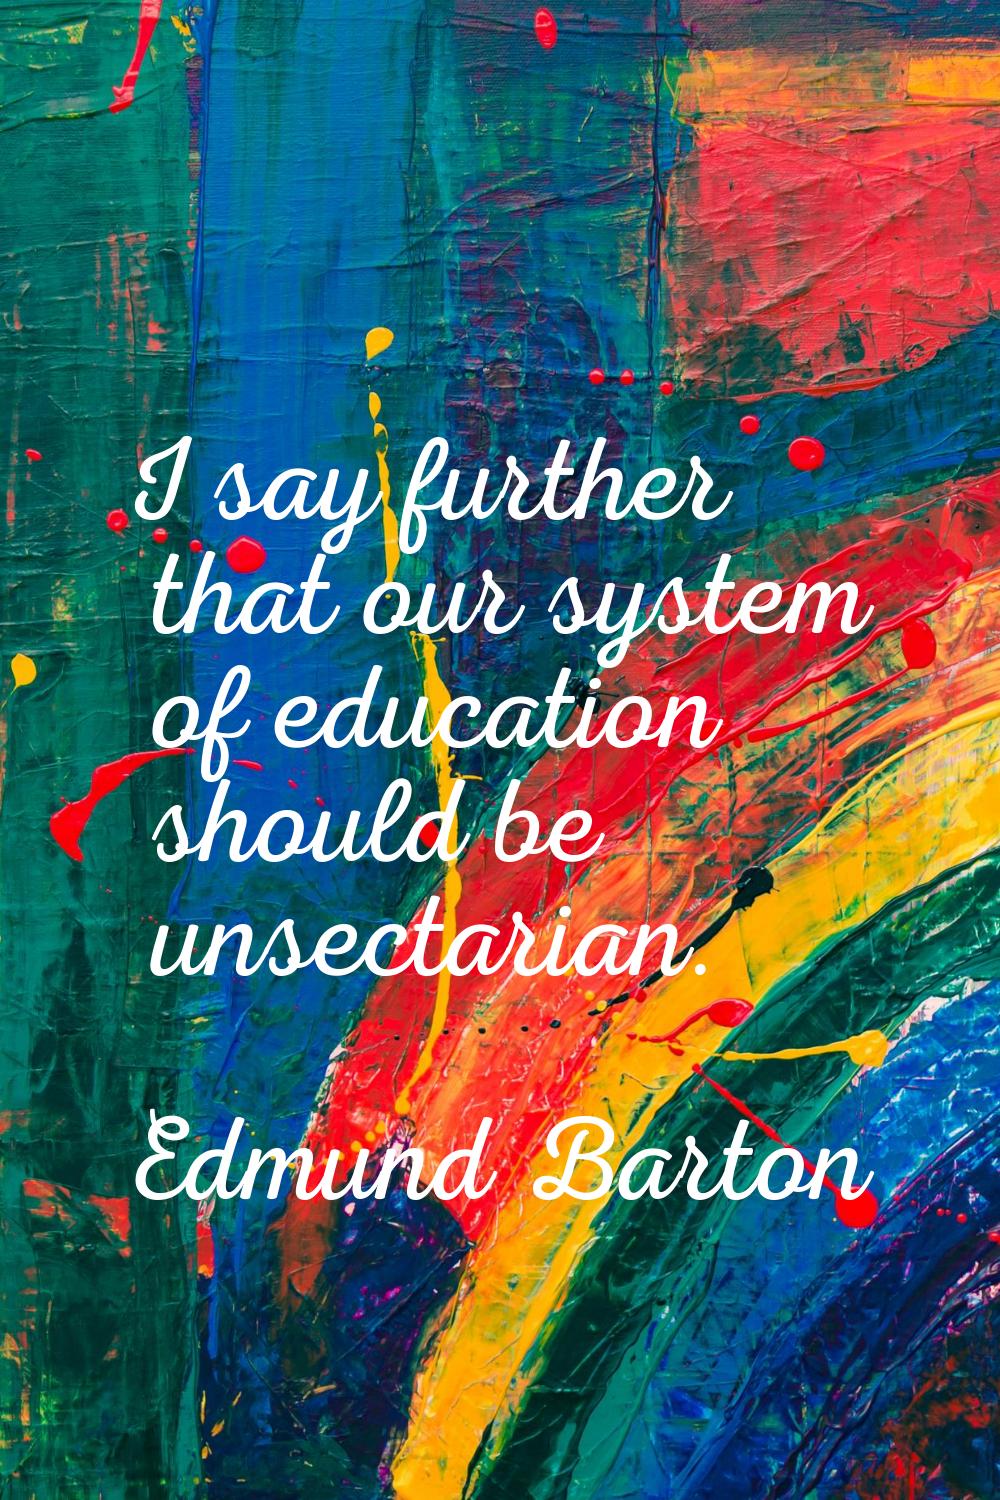 I say further that our system of education should be unsectarian.